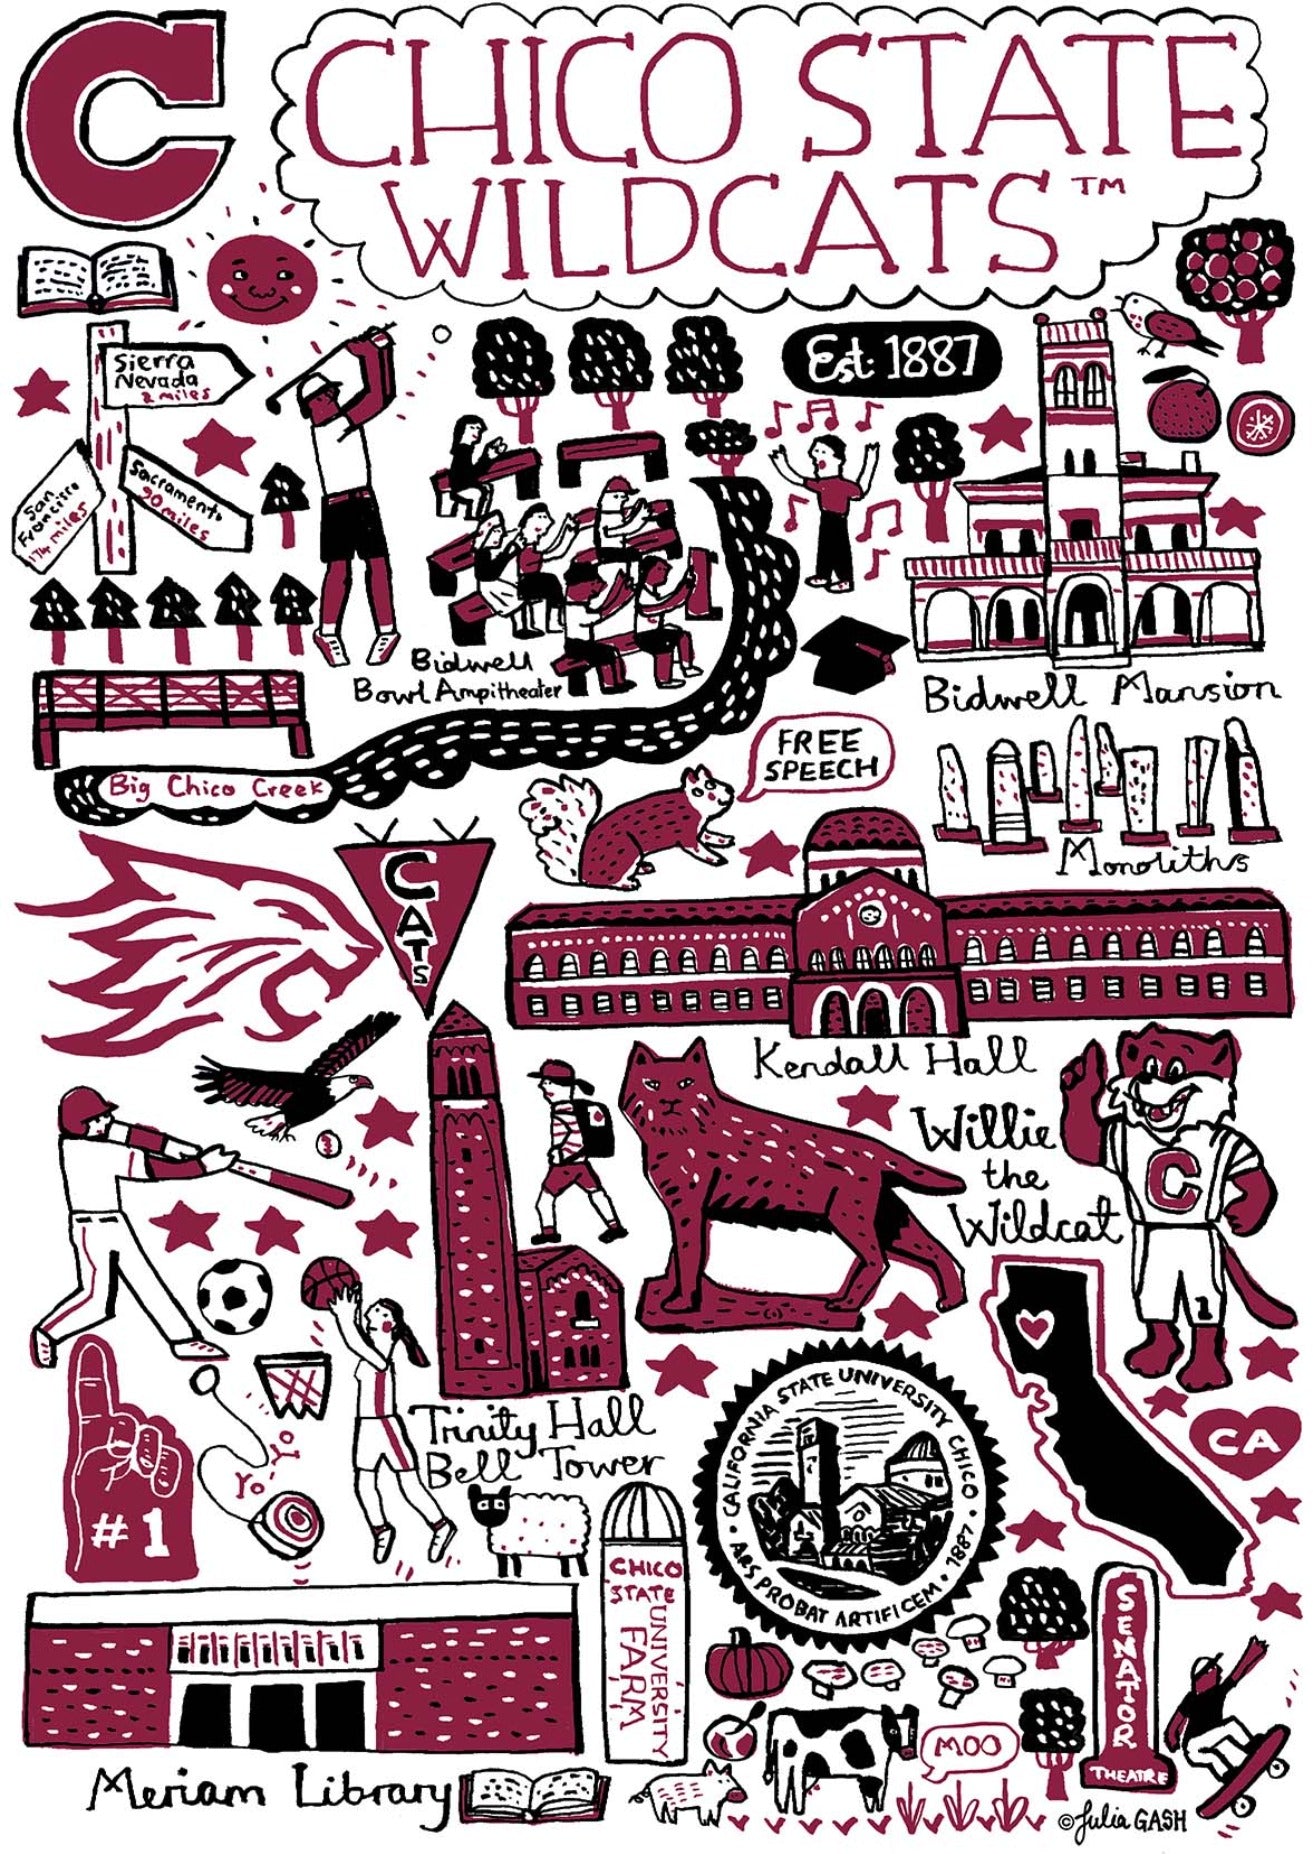 Chico State Wildcats by Julia Gash